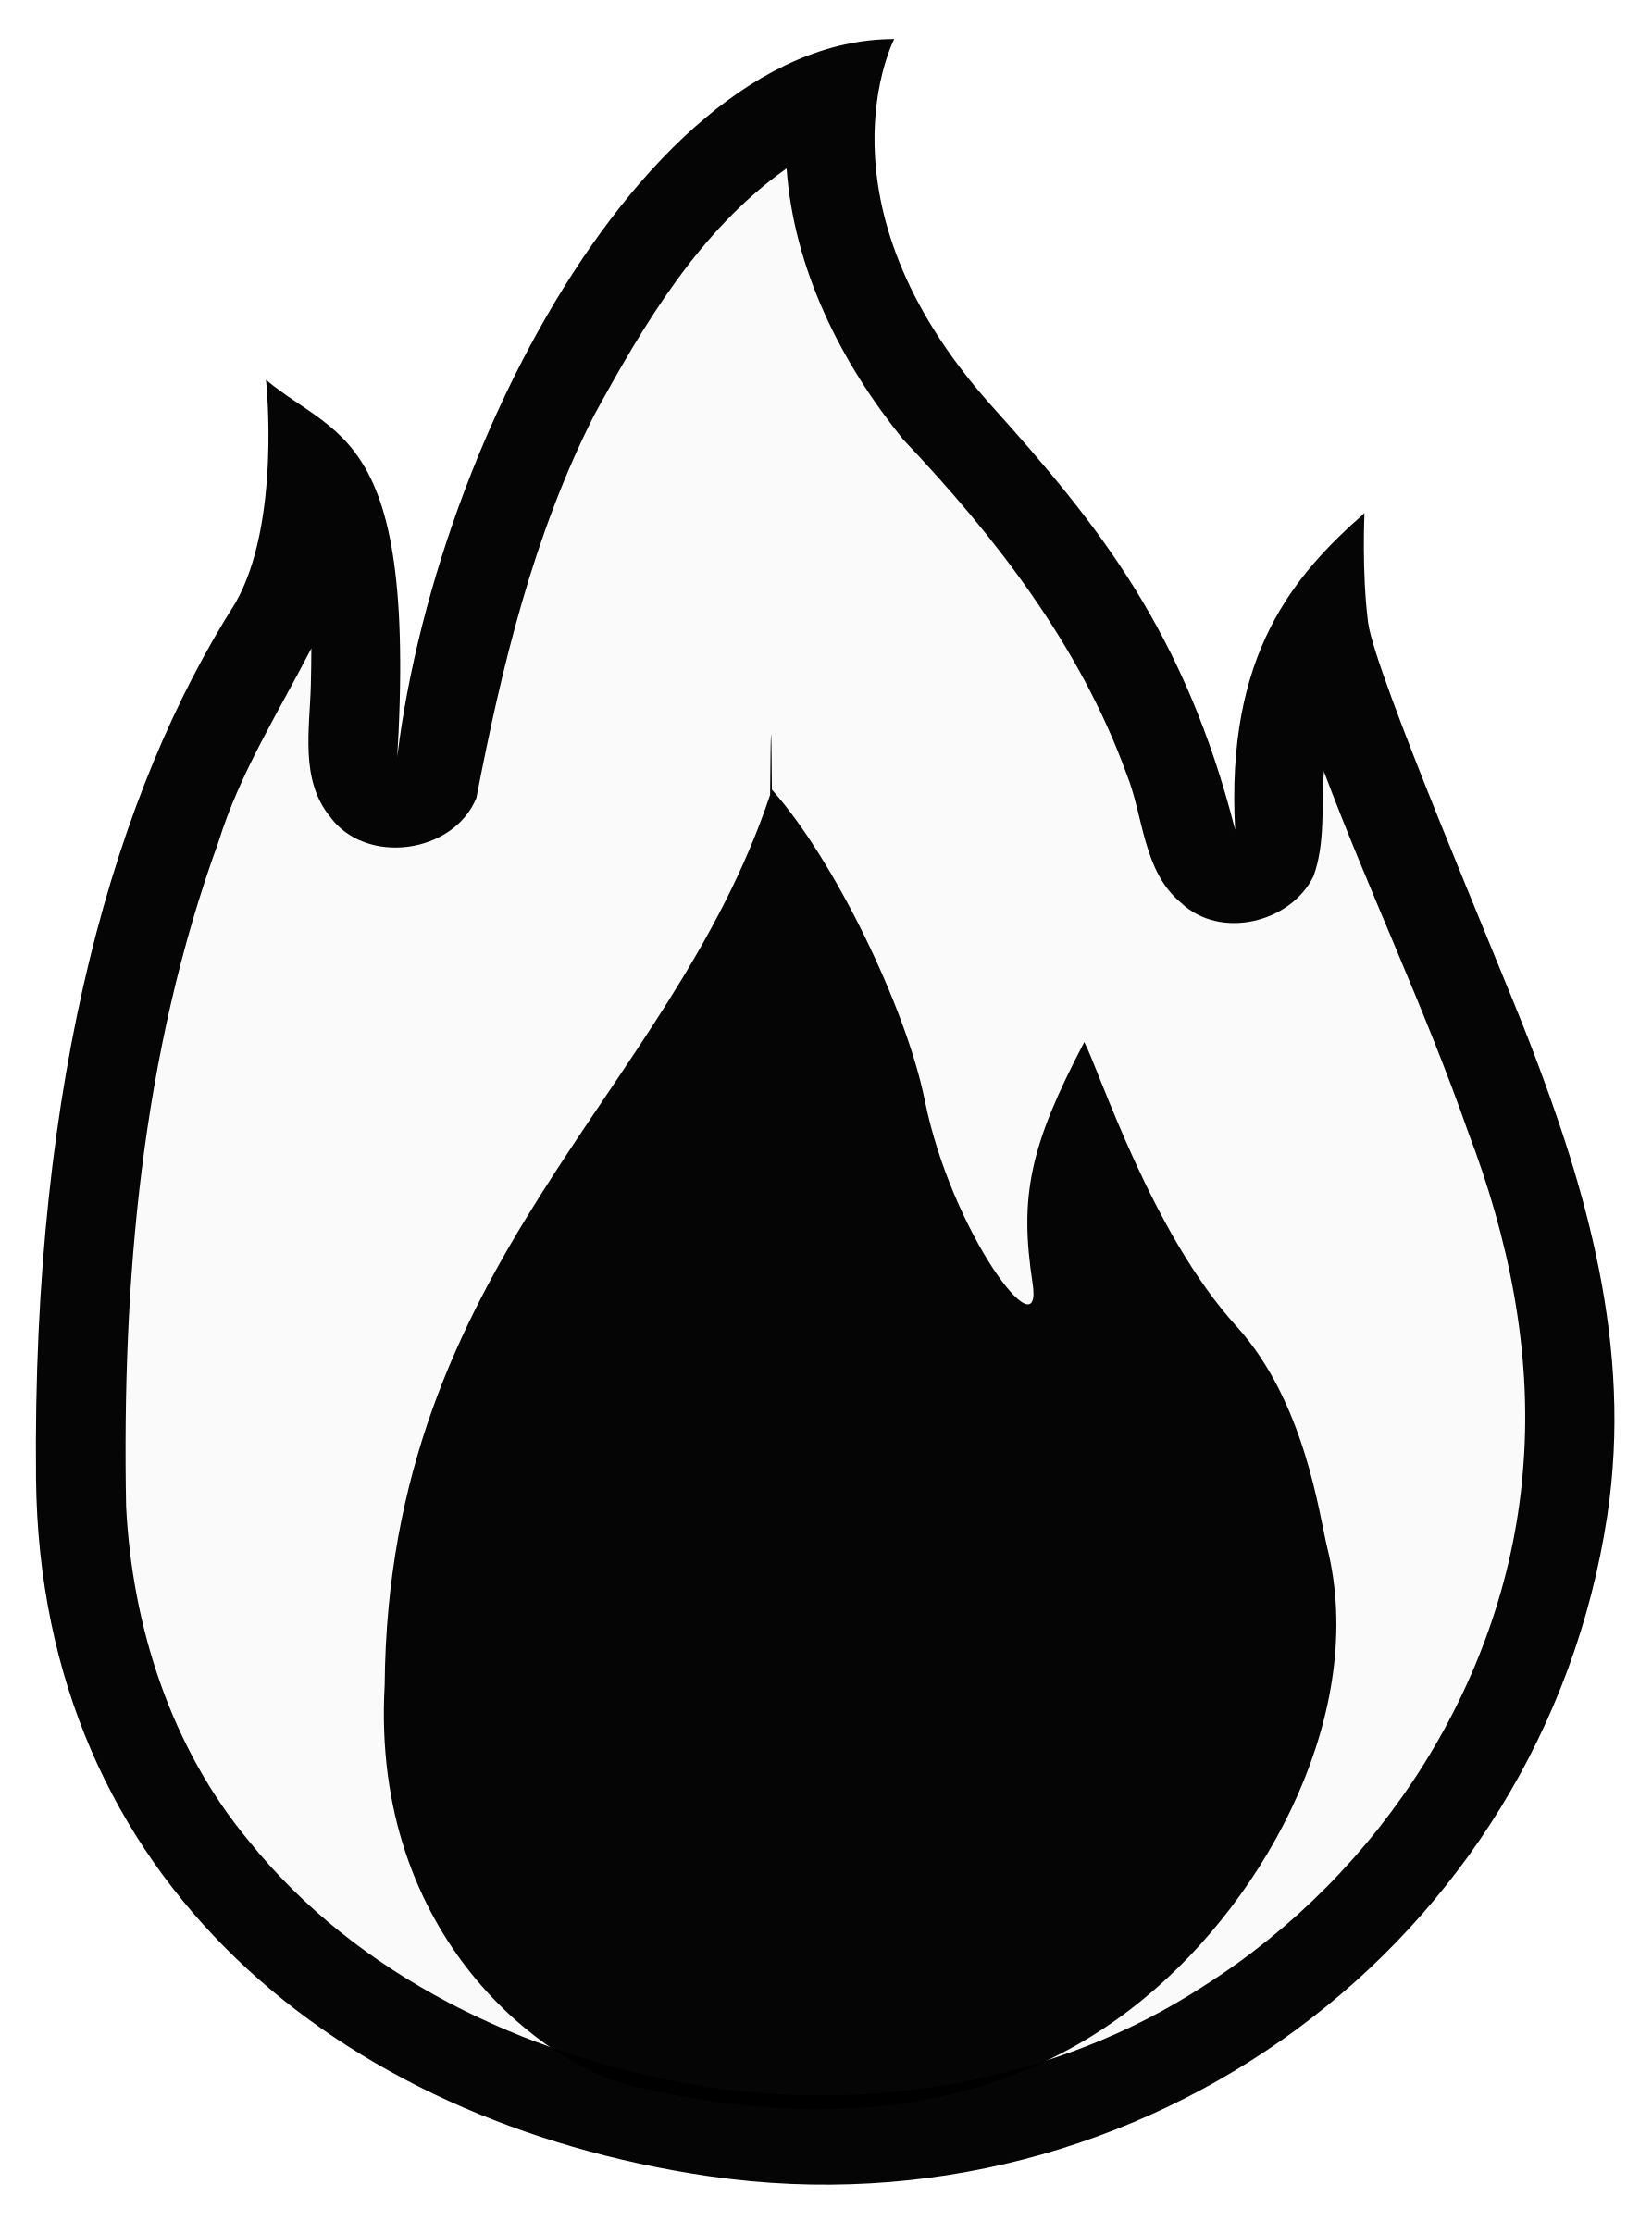 14+ Flame Clipart Preview Monochrome Flame HDClipartAll